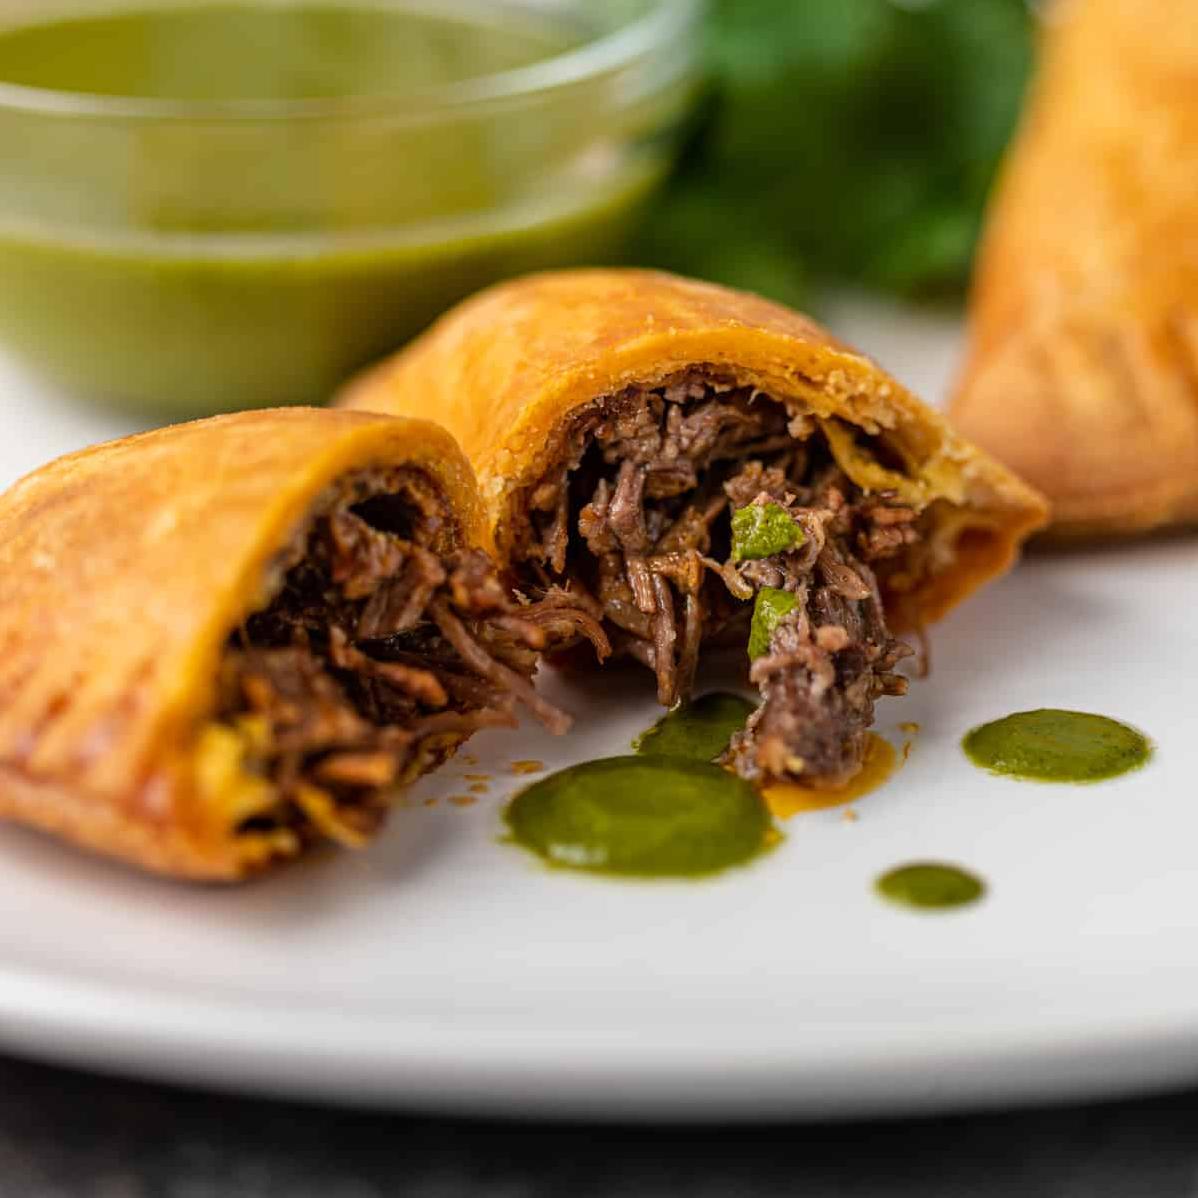  These meat empanadas are a satisfying meal for any time of the day.